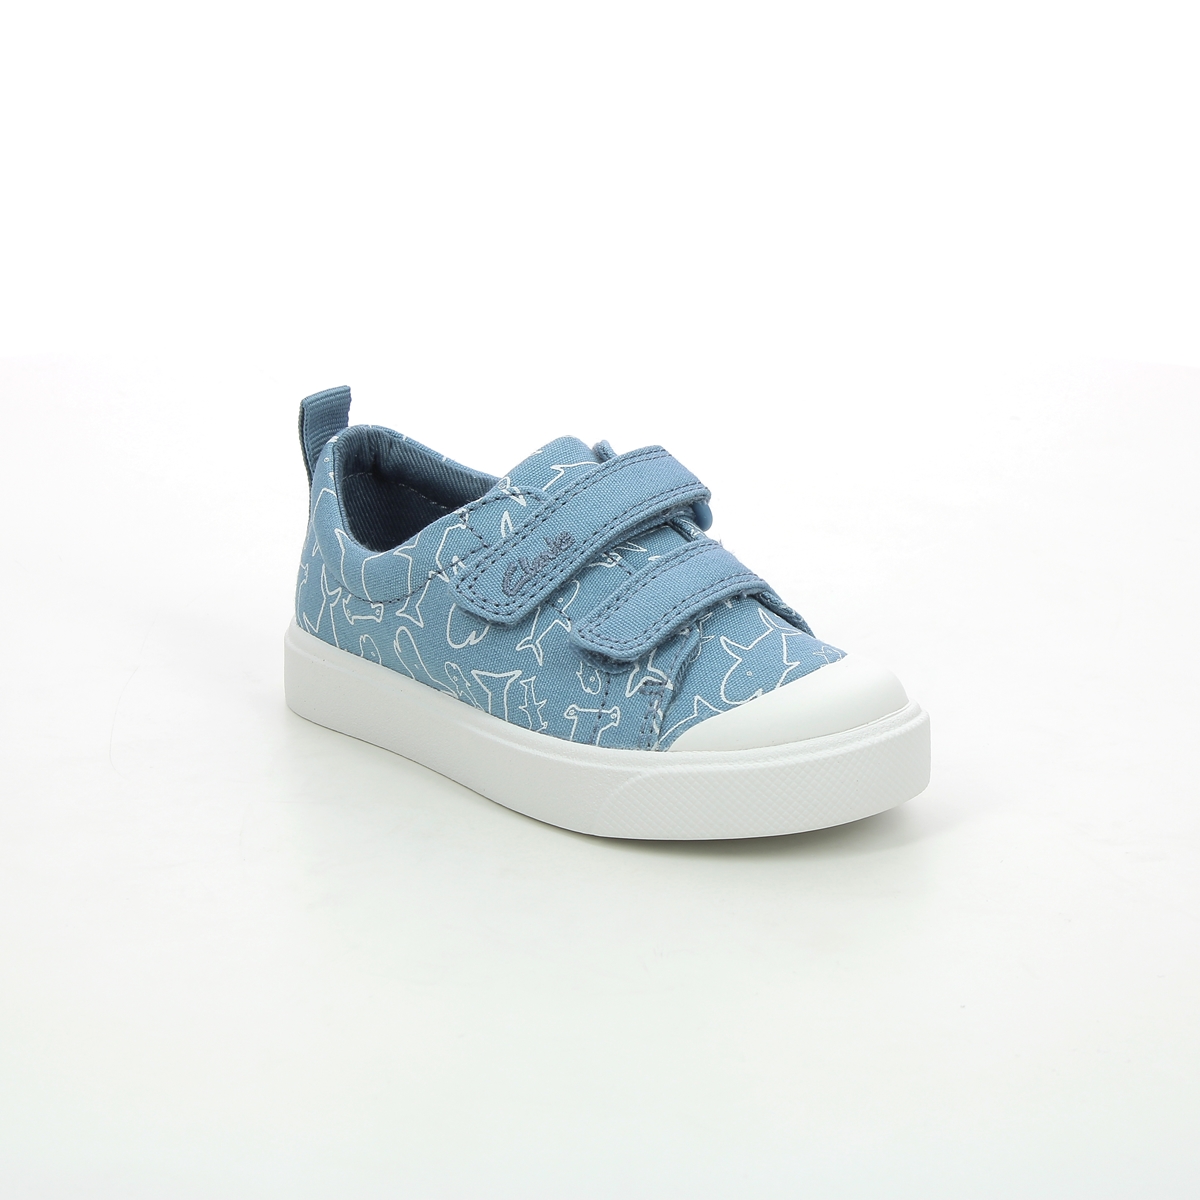 Clarks City Bright T F Fit Blue Toddler Boys Trainers